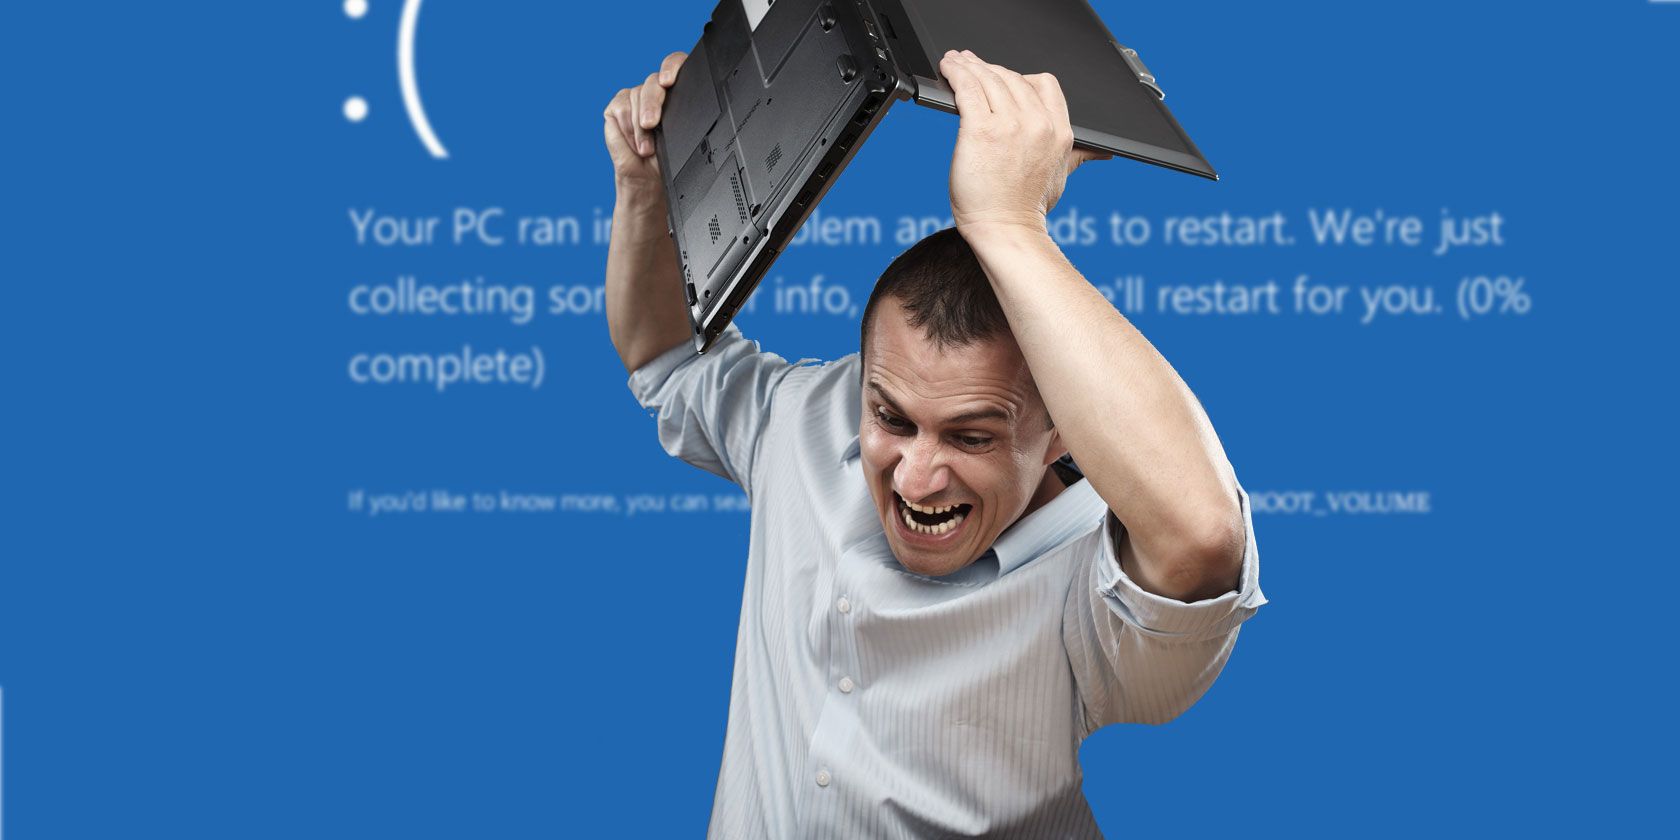 Man about to drop his laptop with blue windows error screen background.